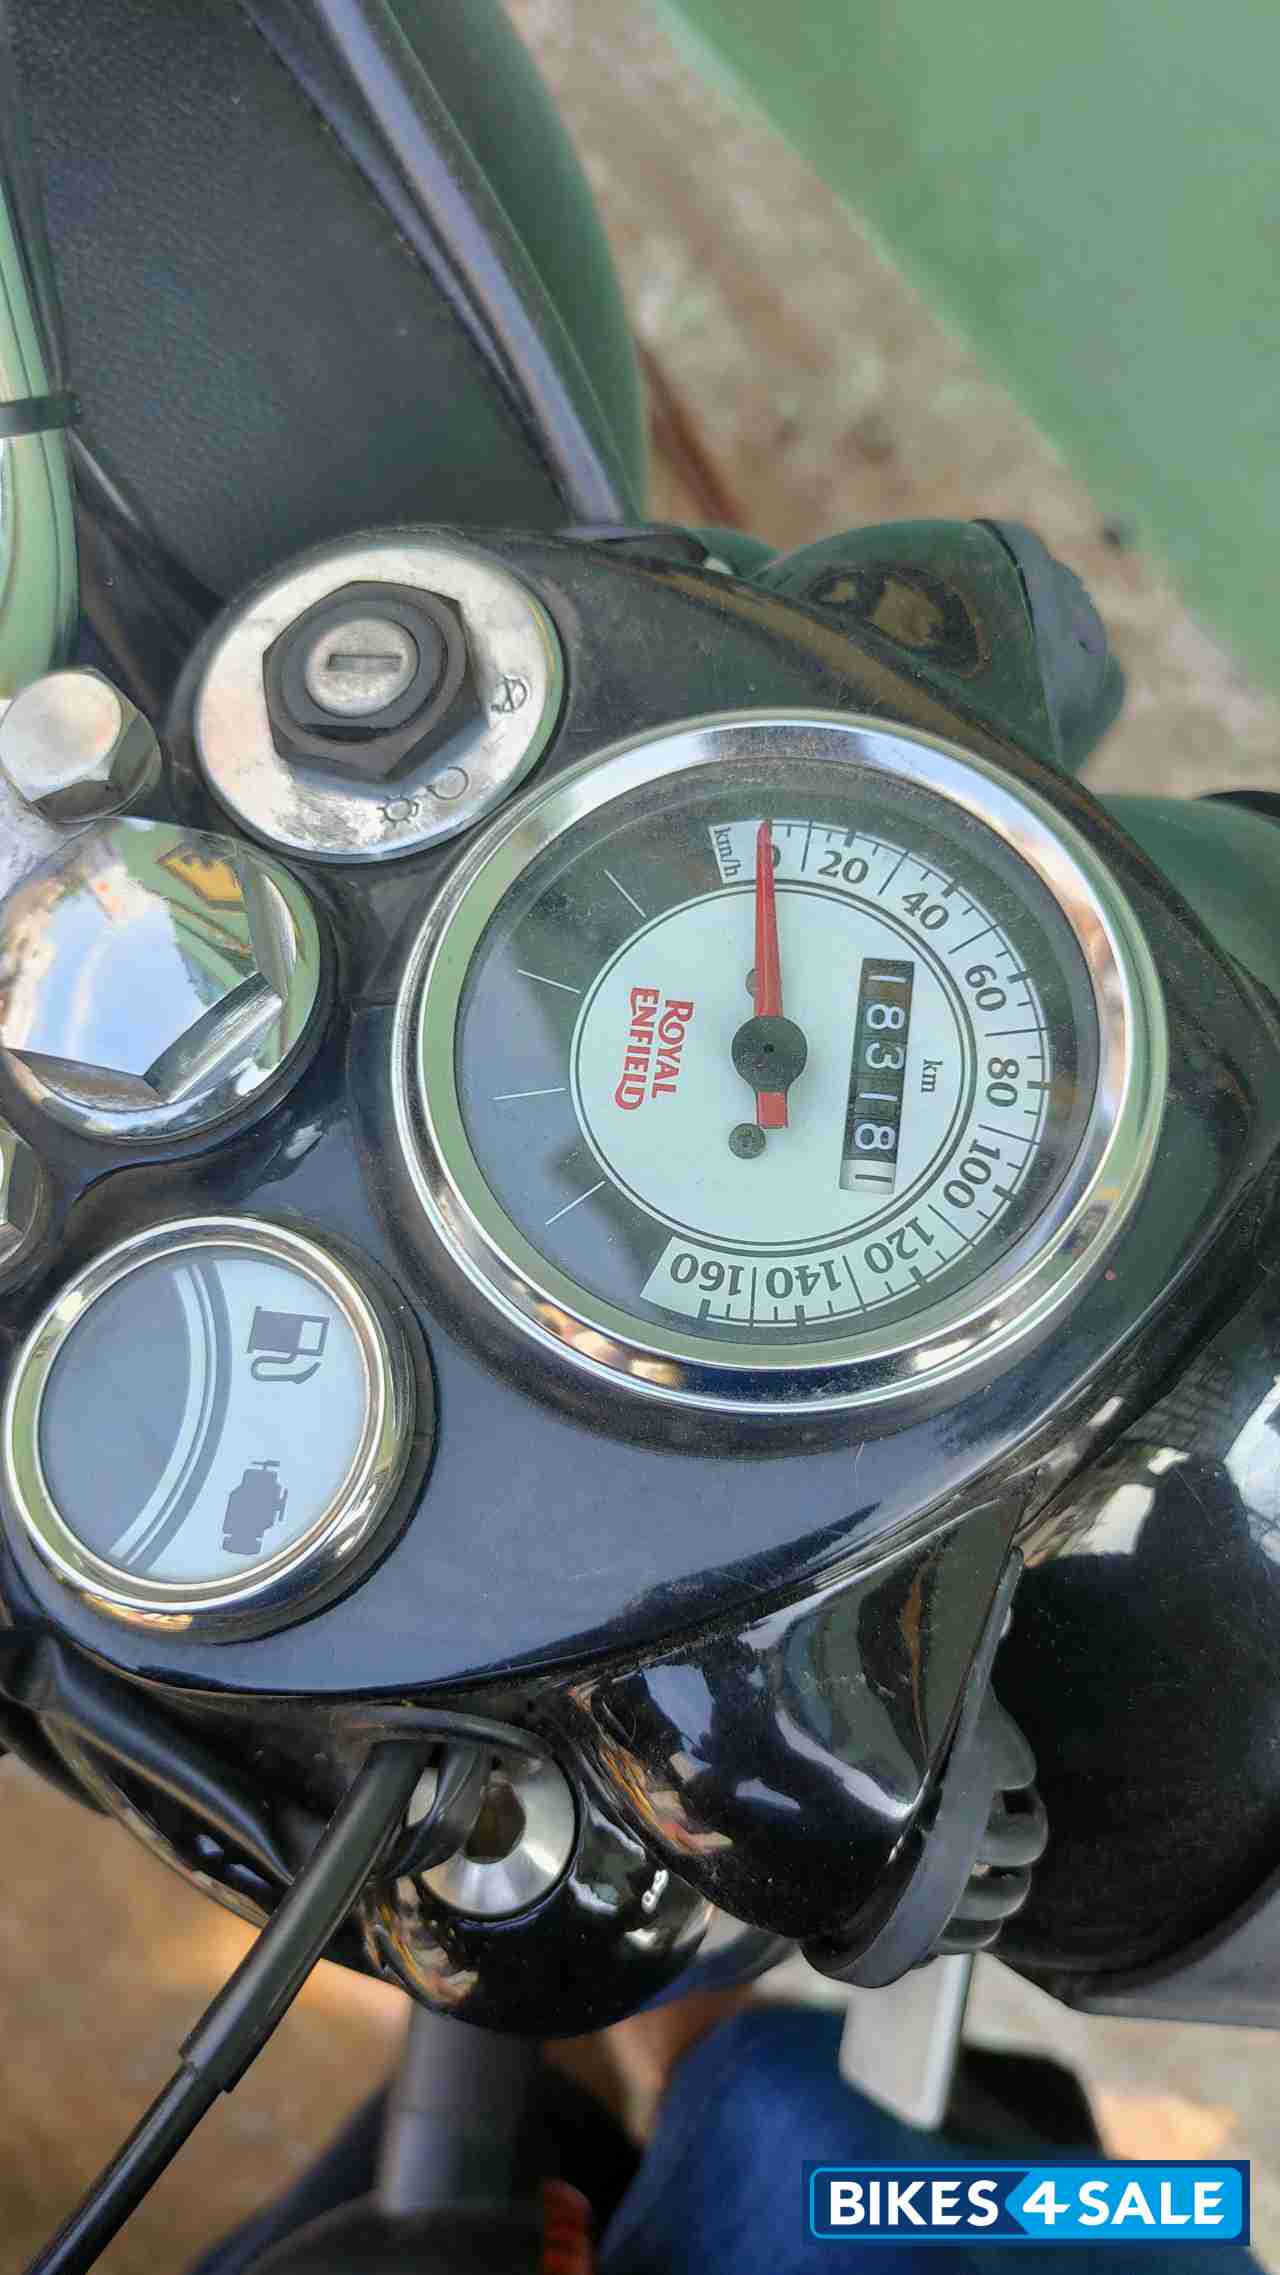 Efi Pure Black Royal Enfield Classic 350 Single Channel BS6